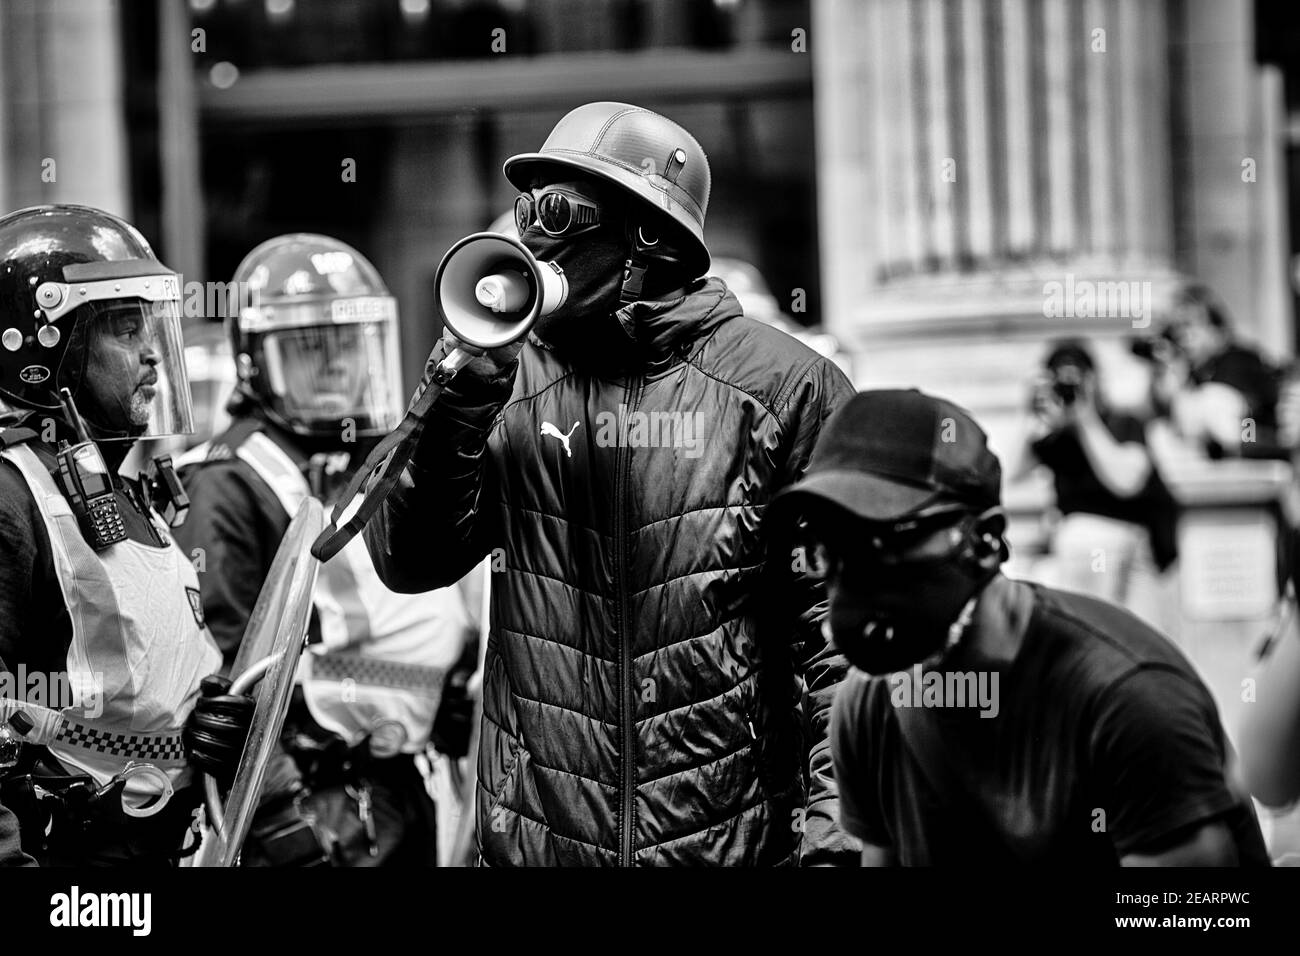 London 13 June 2020 BLM Demonstrators clashing with Far right groups and police in Trafalgar Square Stock Photo